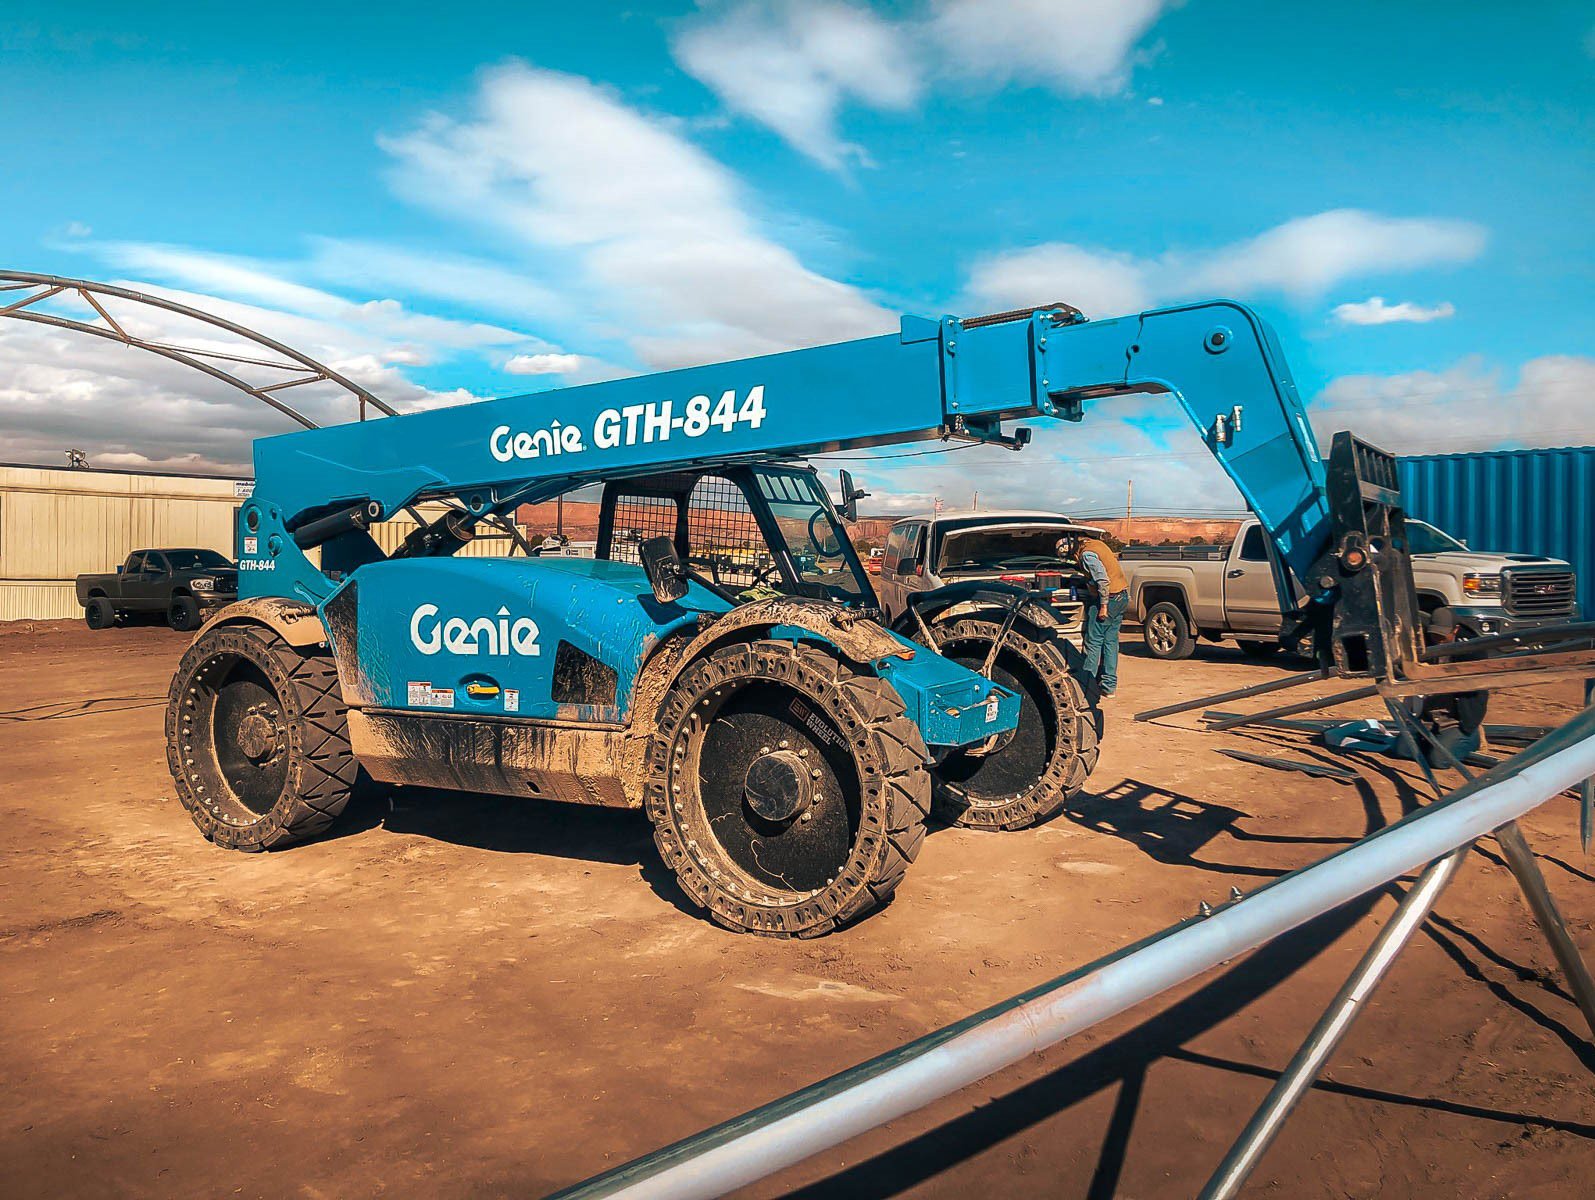 This picture shows solid telehandler tires on a blue Genie telehandler